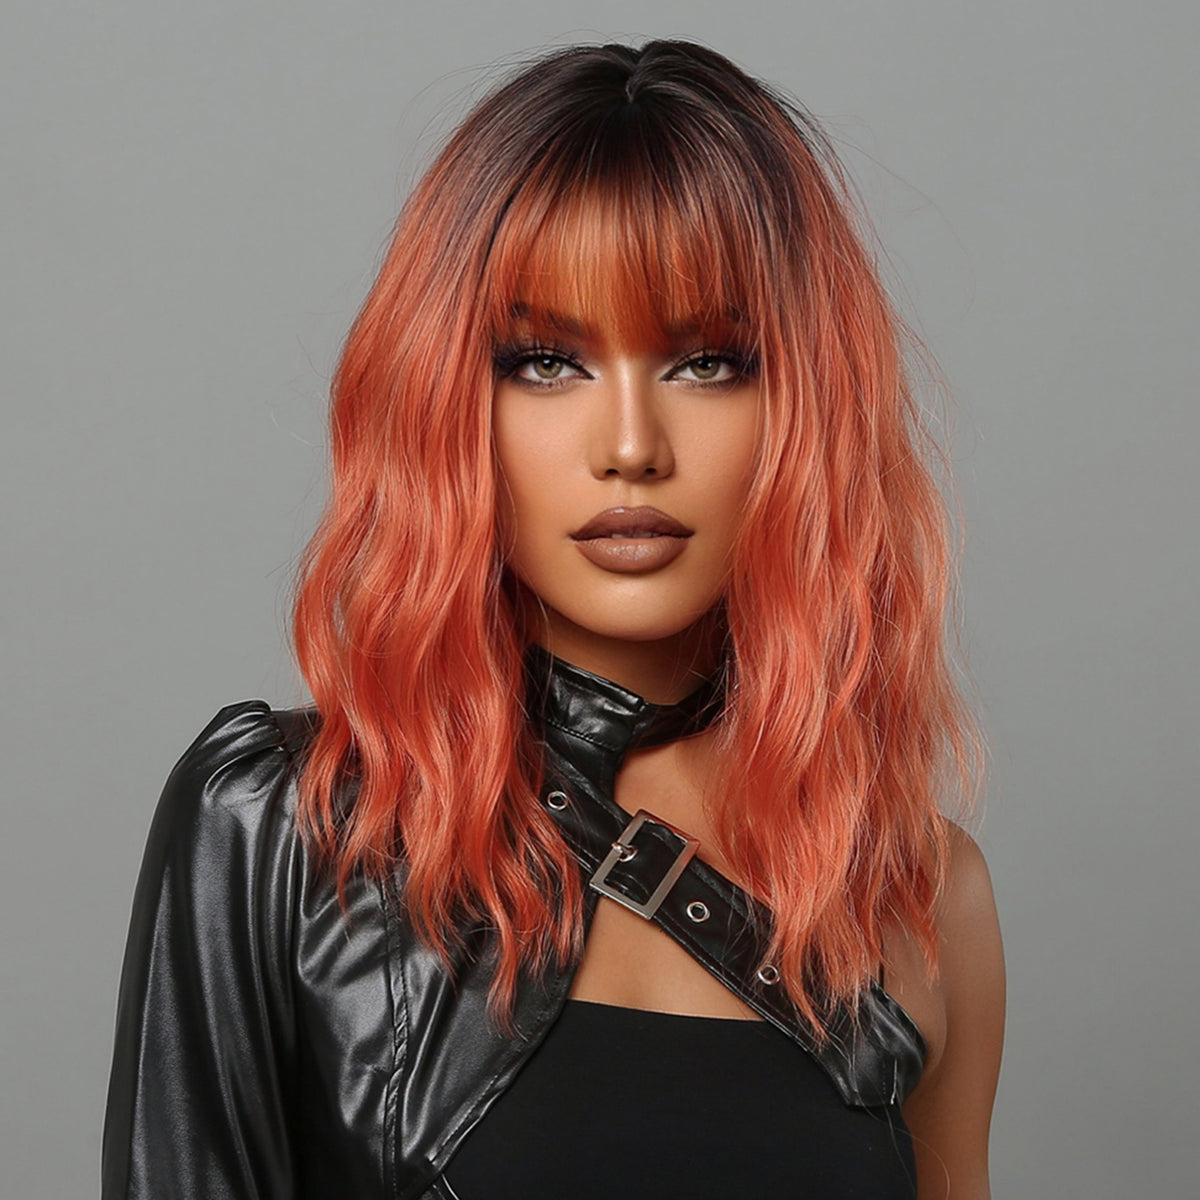 【Sphere 39】16 inch Short Red Wavy Bob Wigs for Women LC2013-1